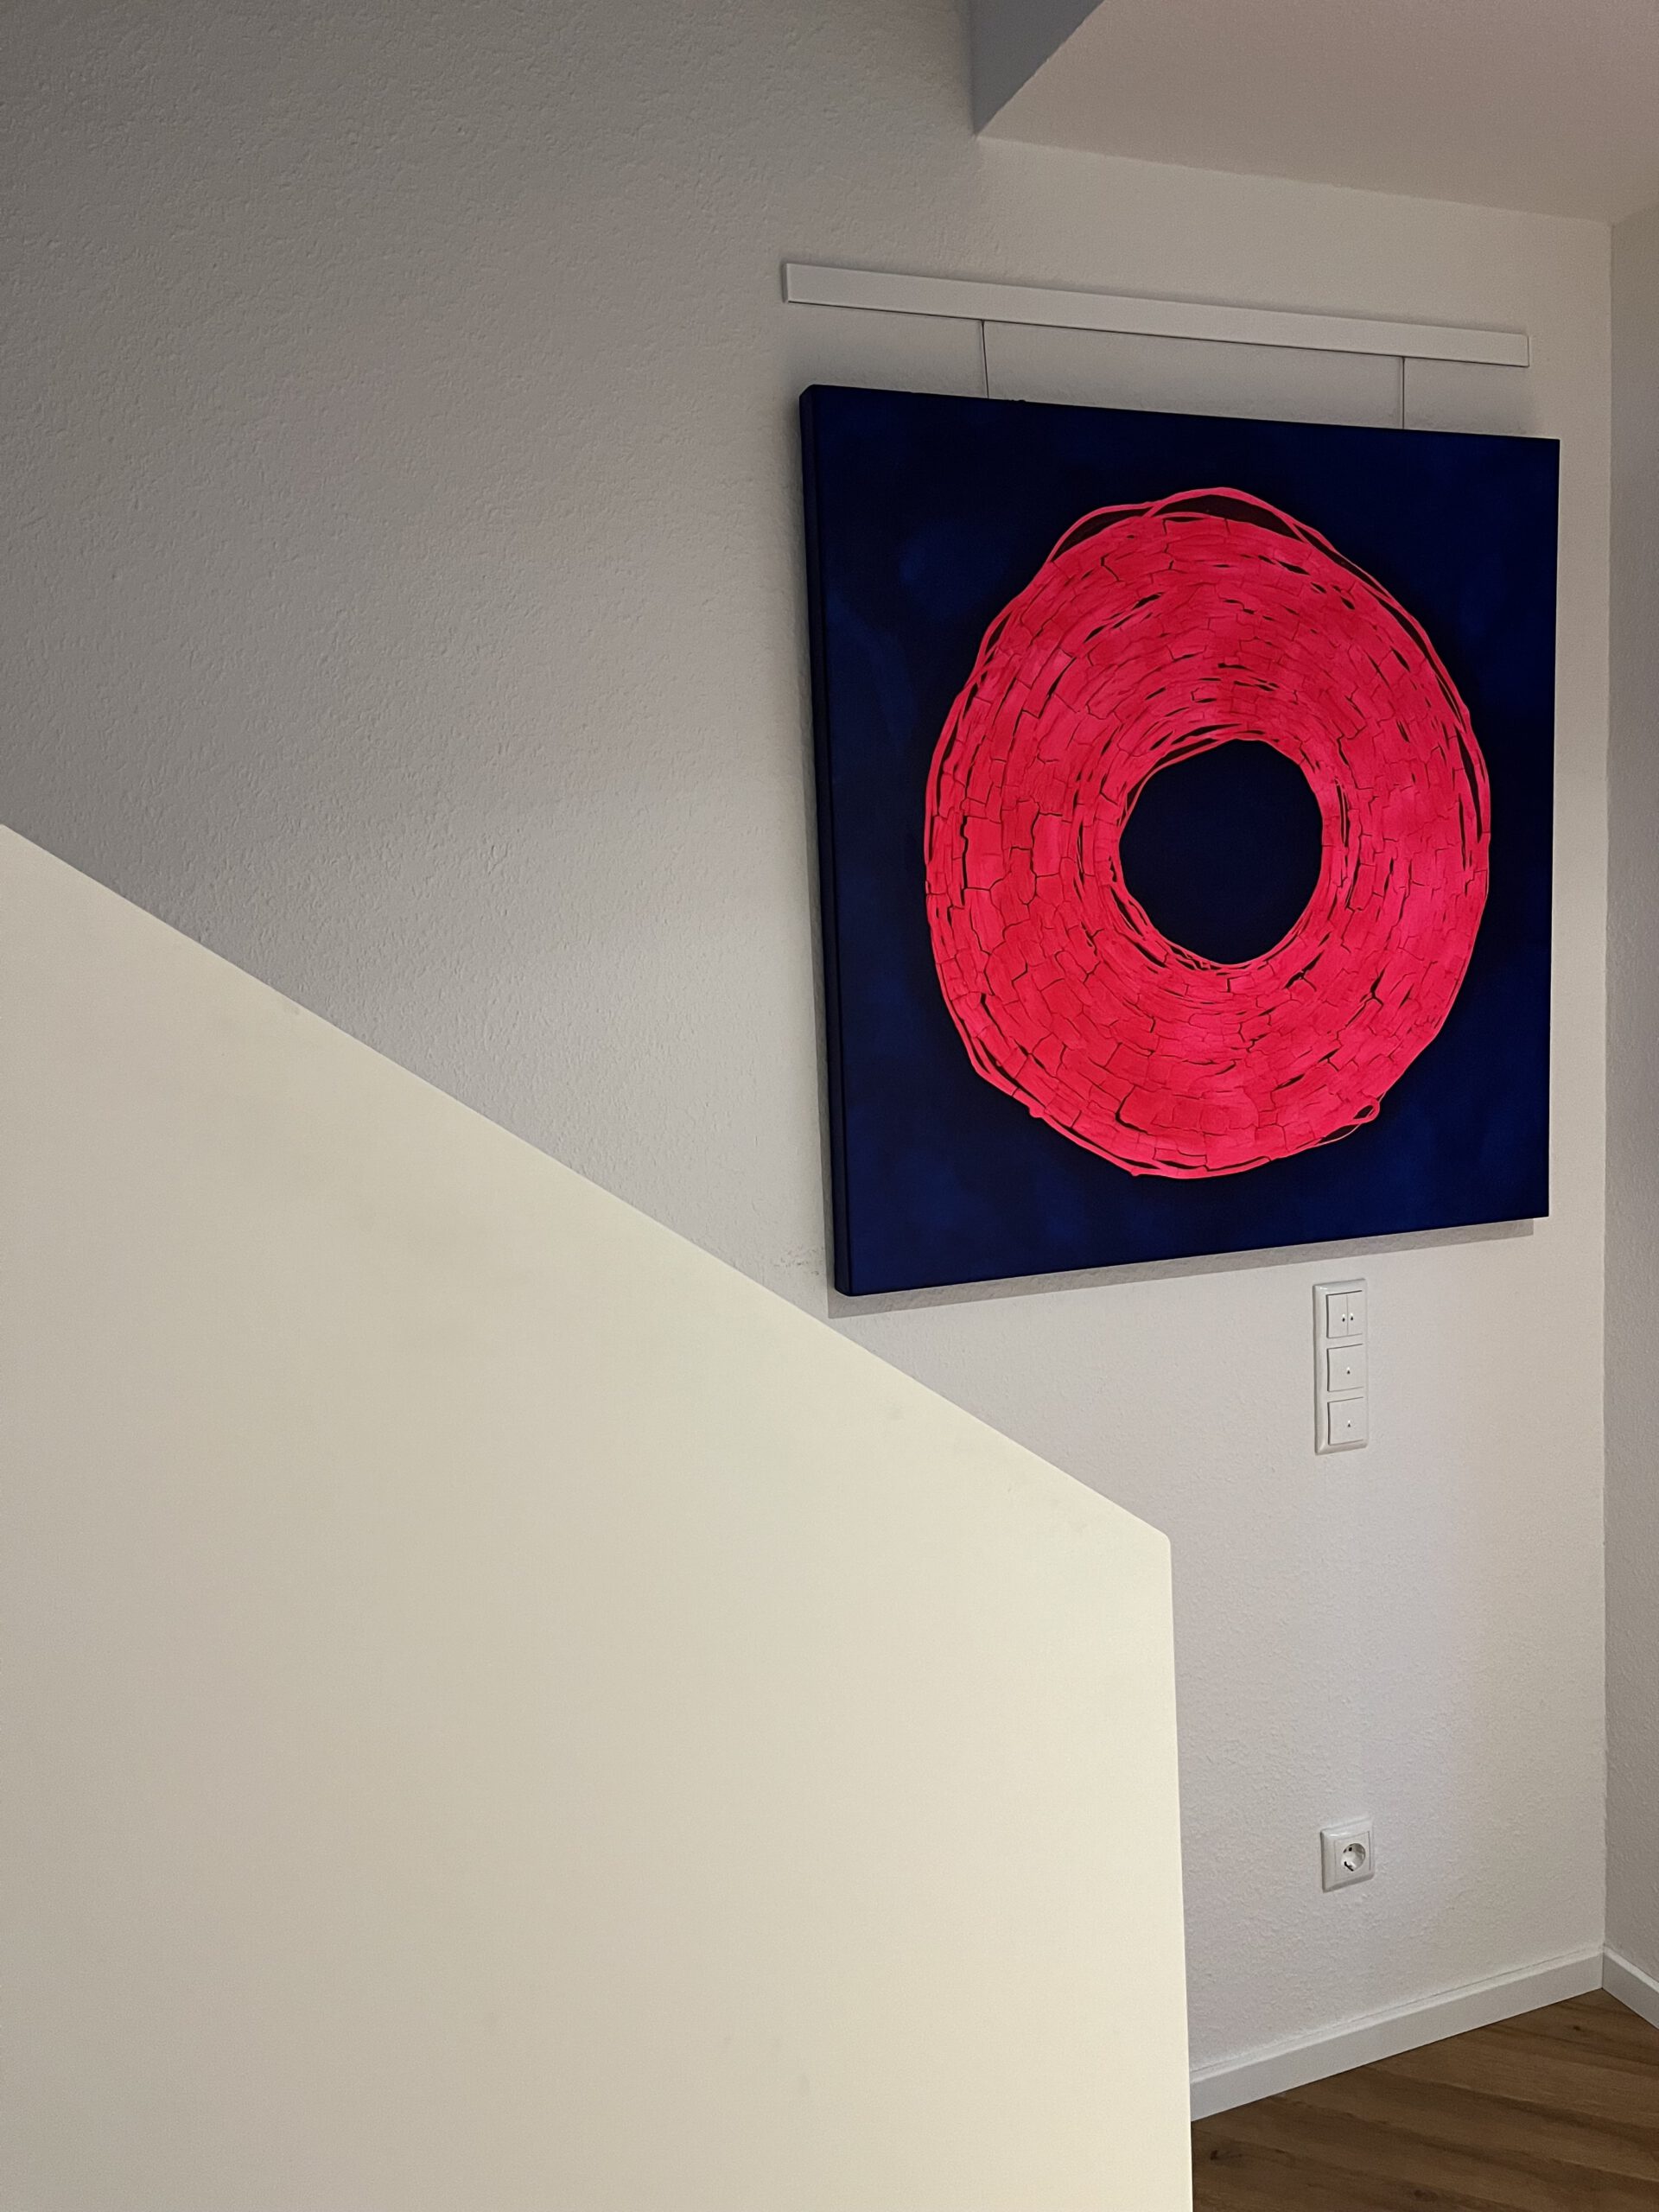 Modern art for your home, office, medical practice or law firm: The eye, blue-neonpink, 100cmx100cm